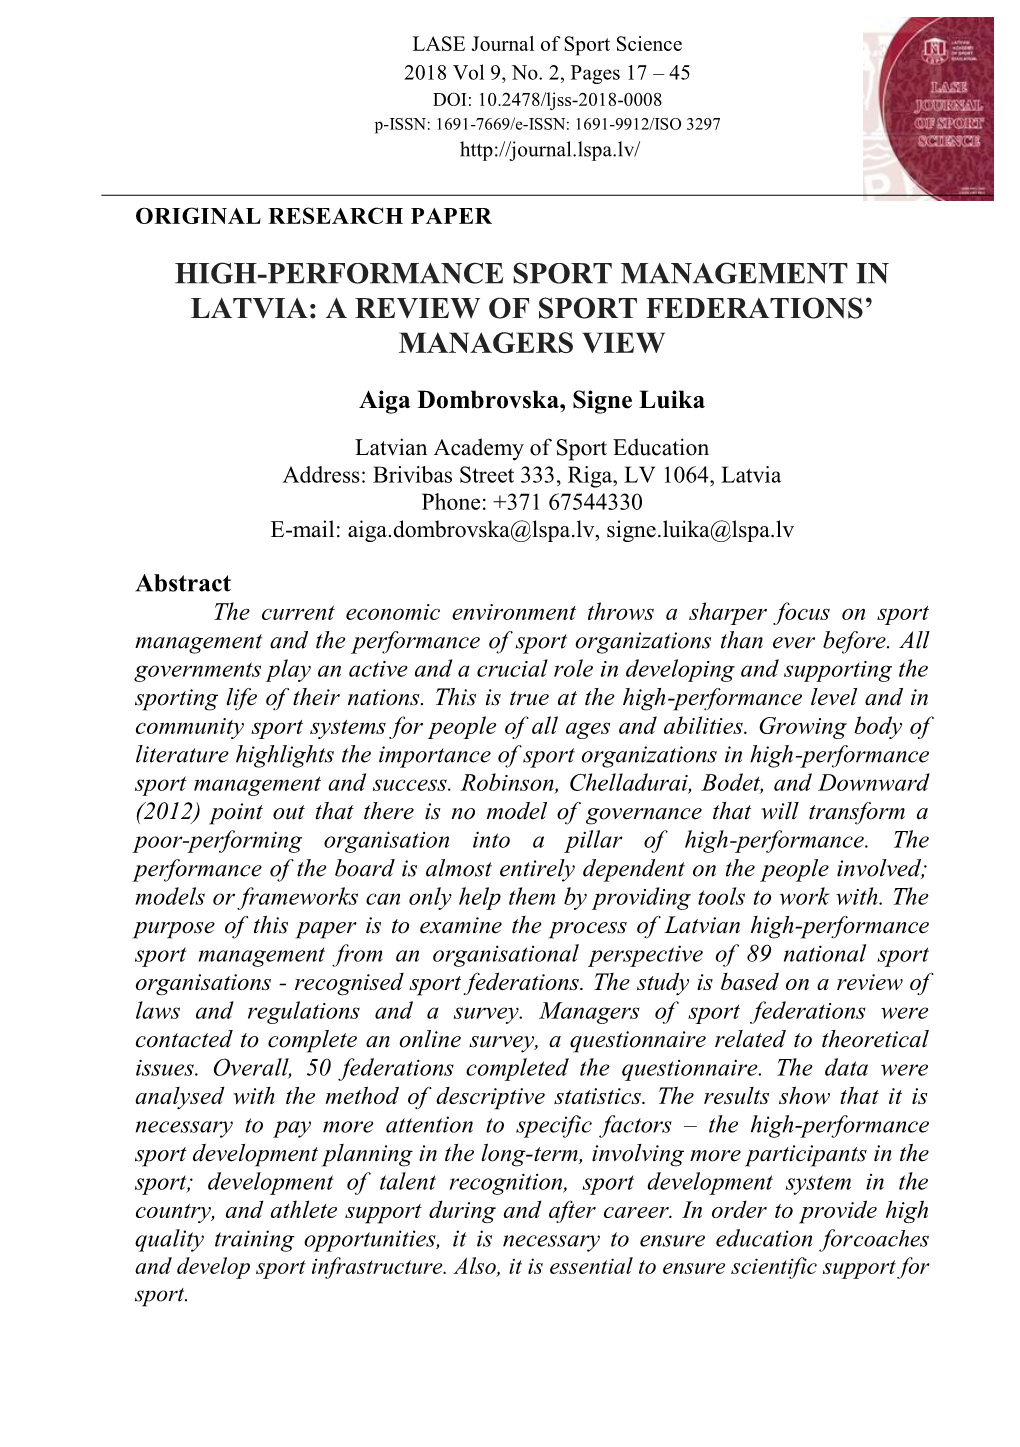 High-Performance Sport Management in Latvia: a Review of Sport Federations’ Managers View